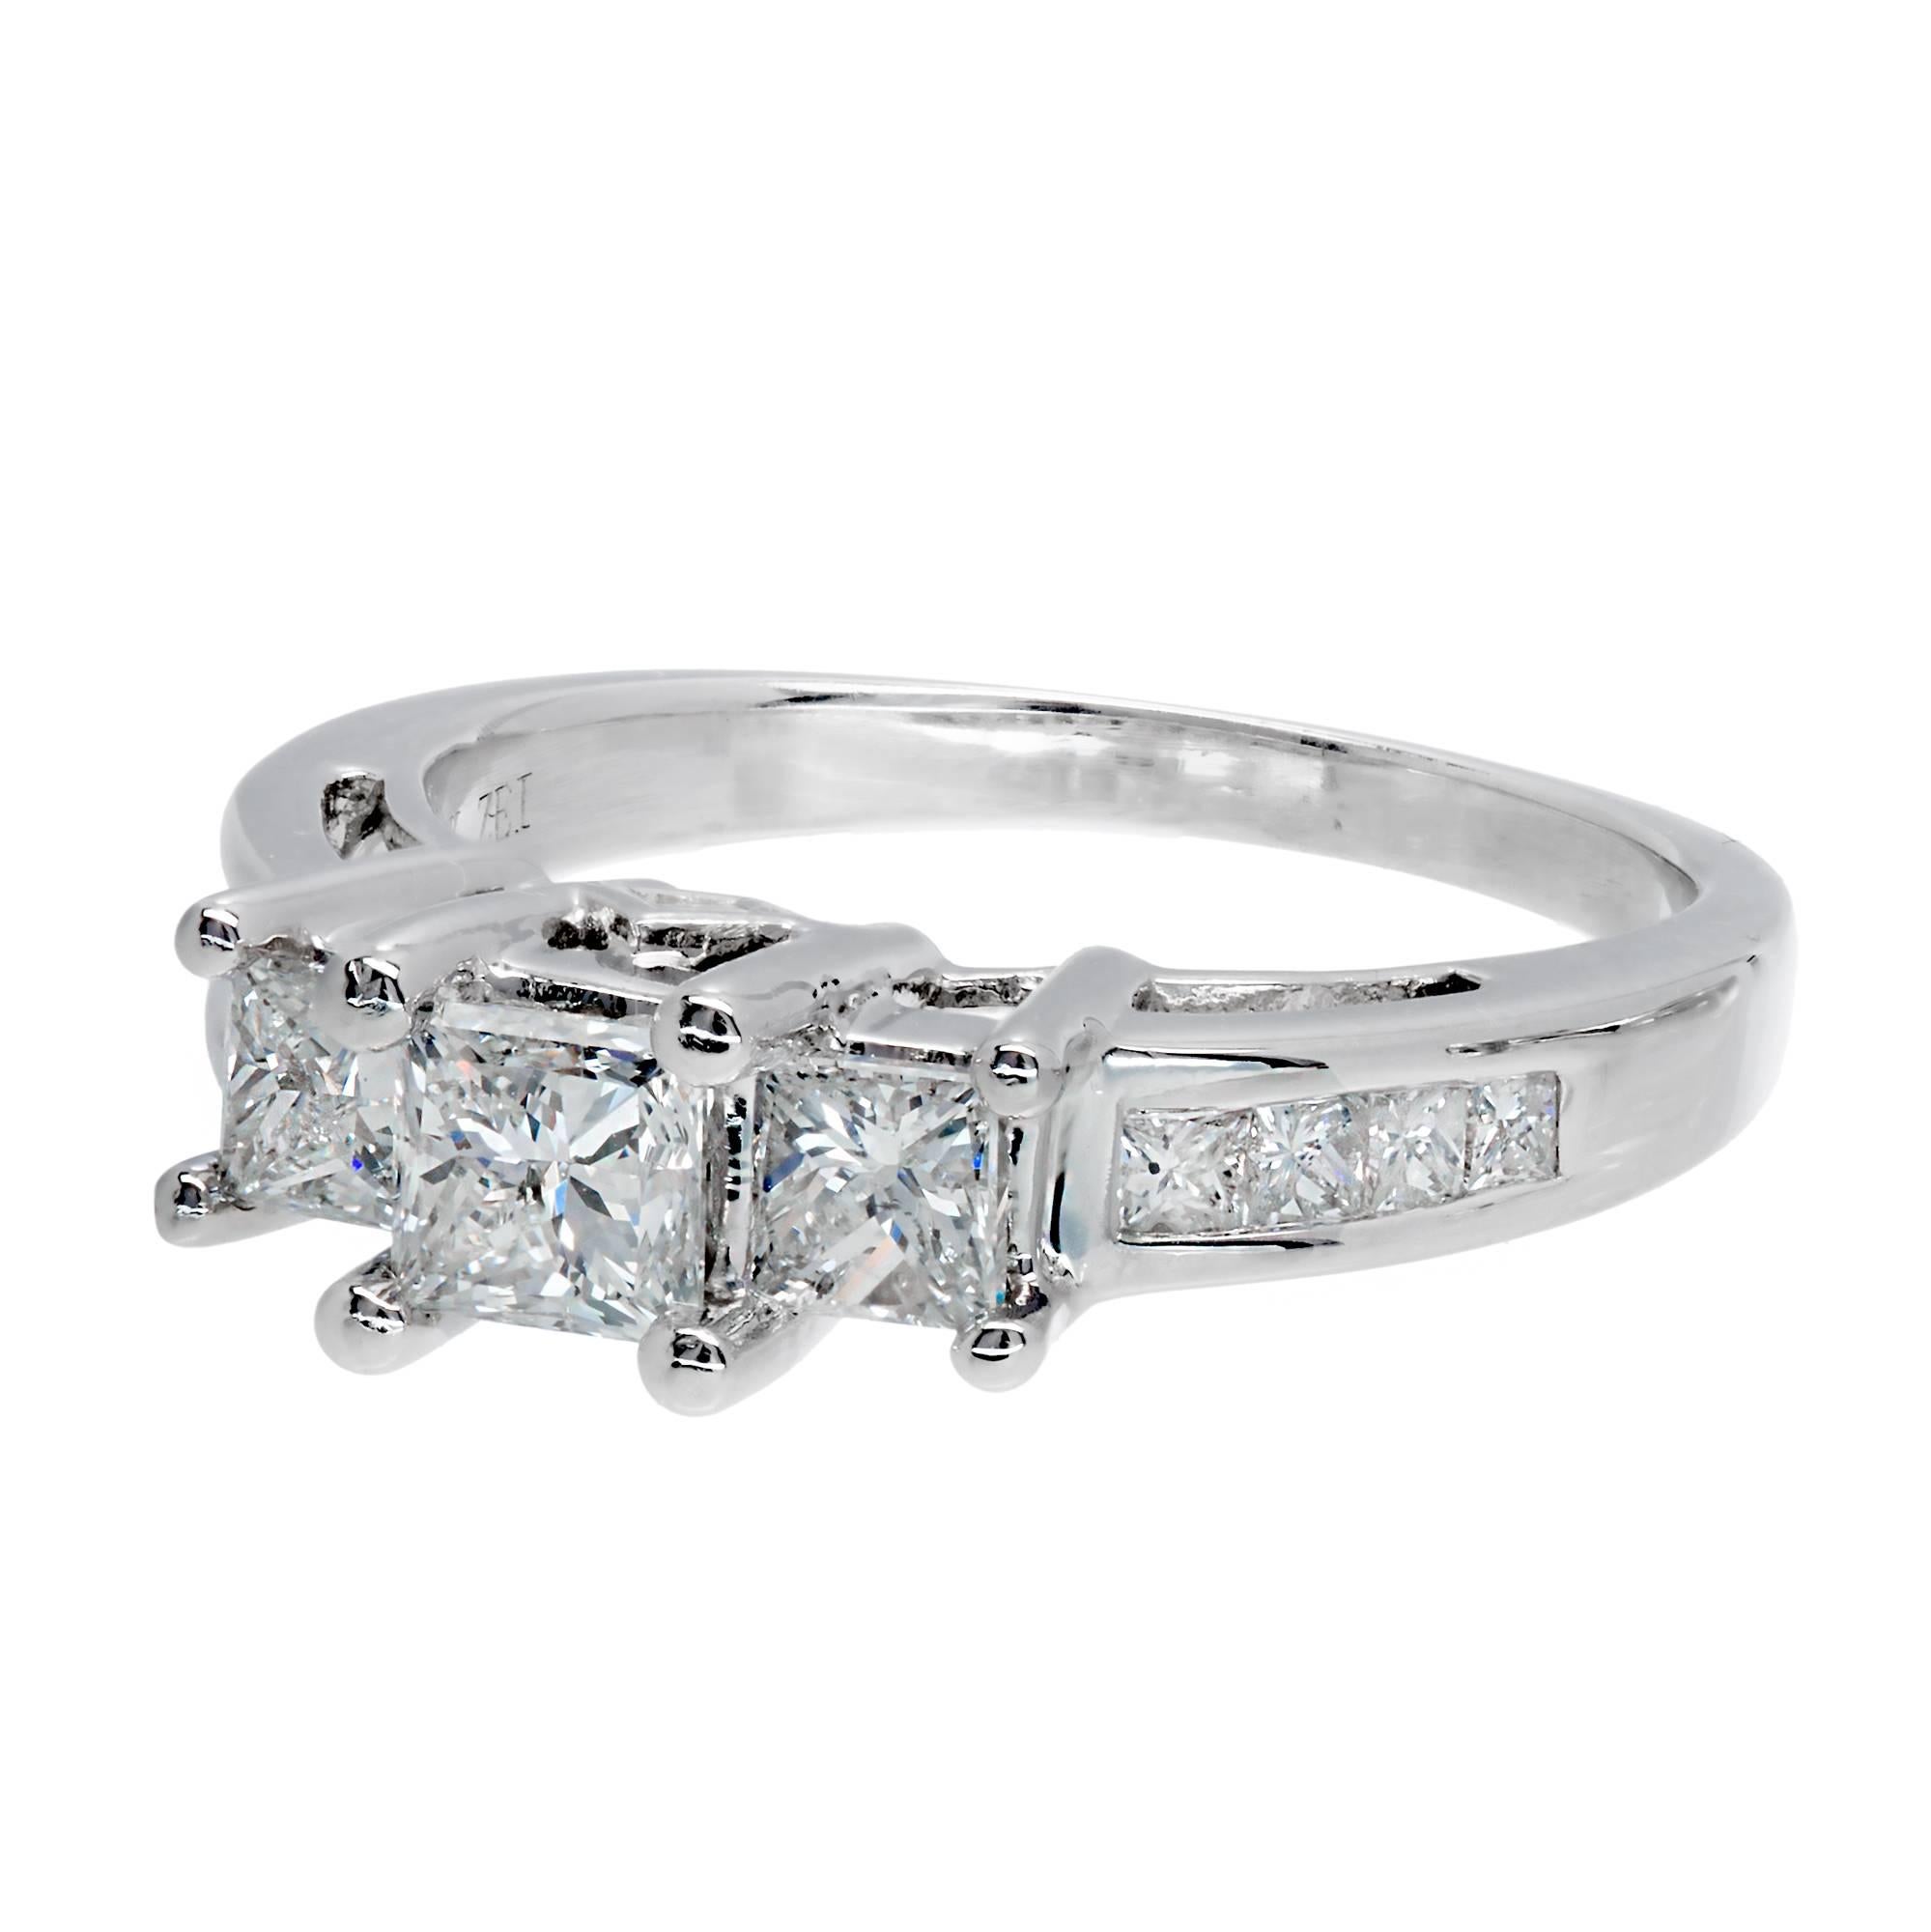 Princess cut Diamond 3 stone engagement ring with Princess cut accent Diamonds. 

14k white gold
1 Princess cut Diamond, approx. total weight .59cts, F – G, SI2, EGL certificate # US313707601D
2 Princess cut Diamonds, approx. total weight .50cts, G